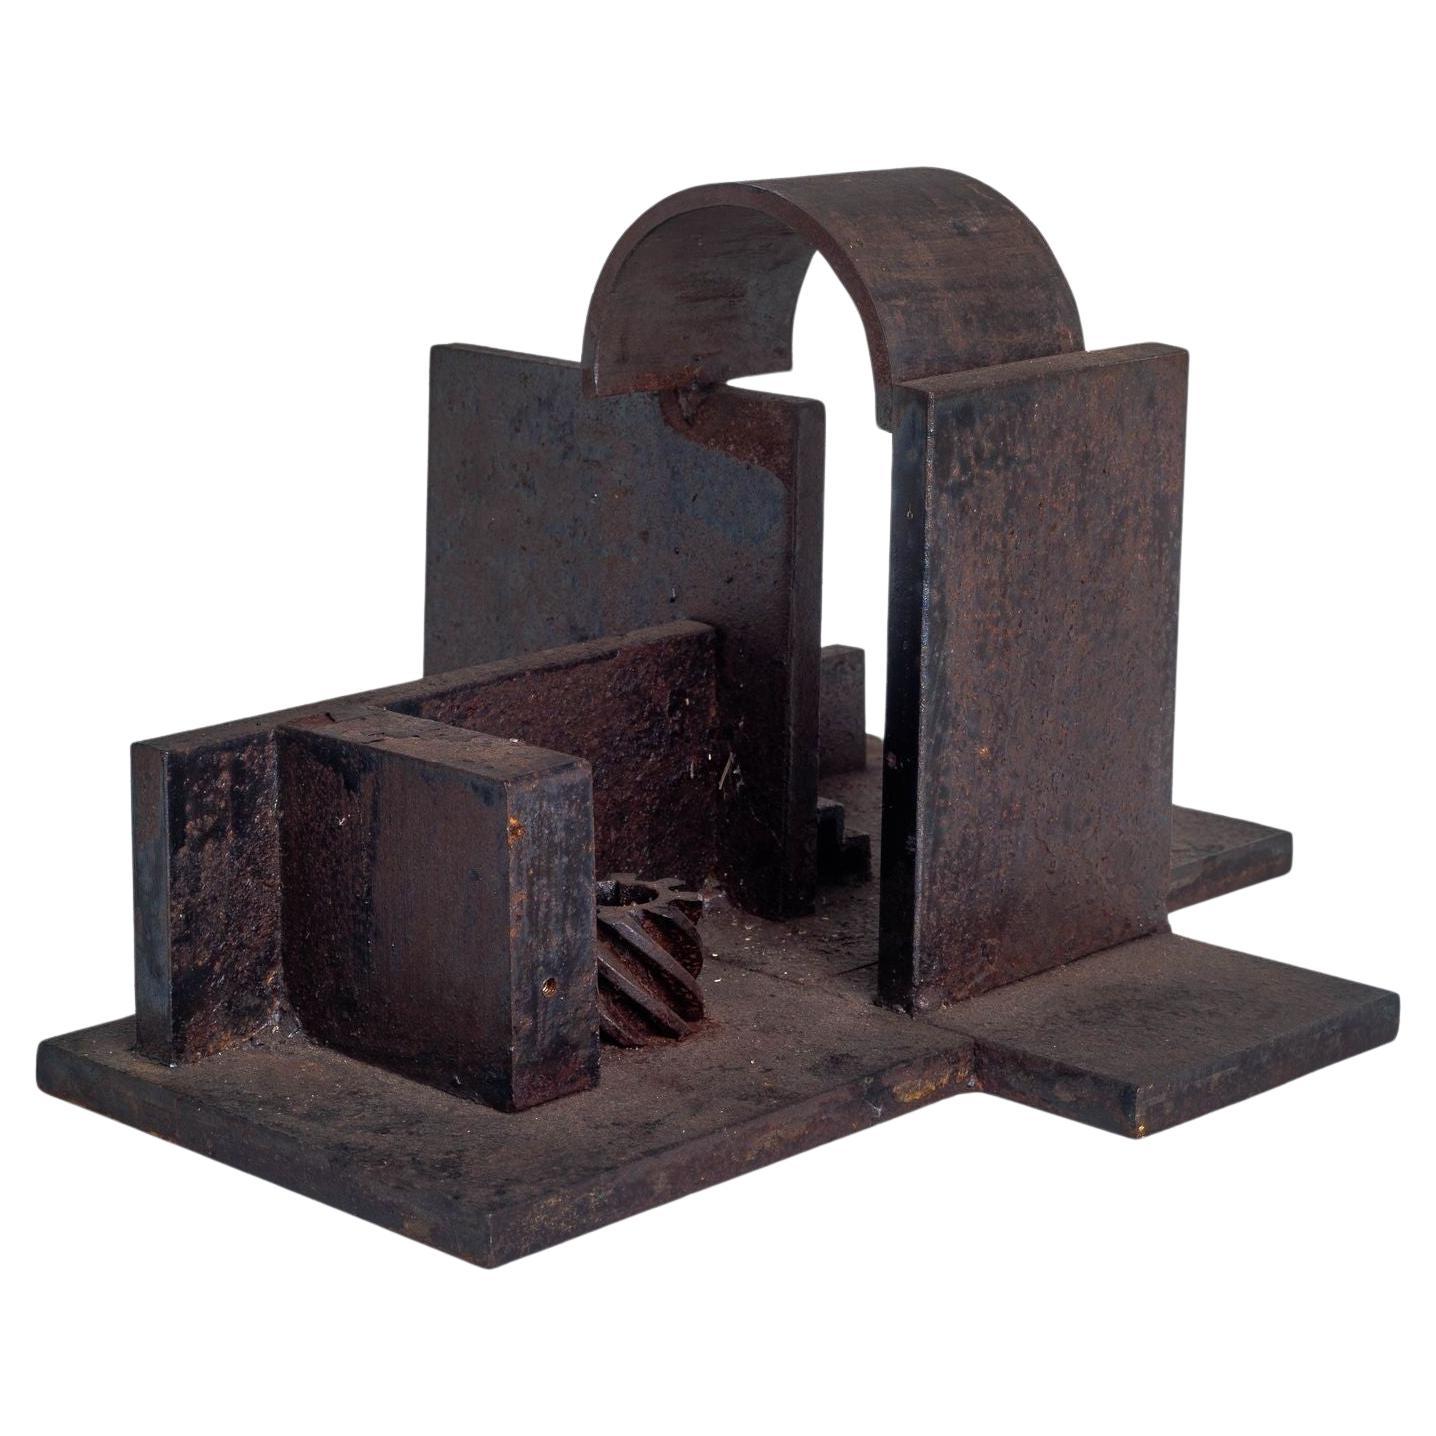 Tony Rosenthal Welded Steel Architectural Sculpture